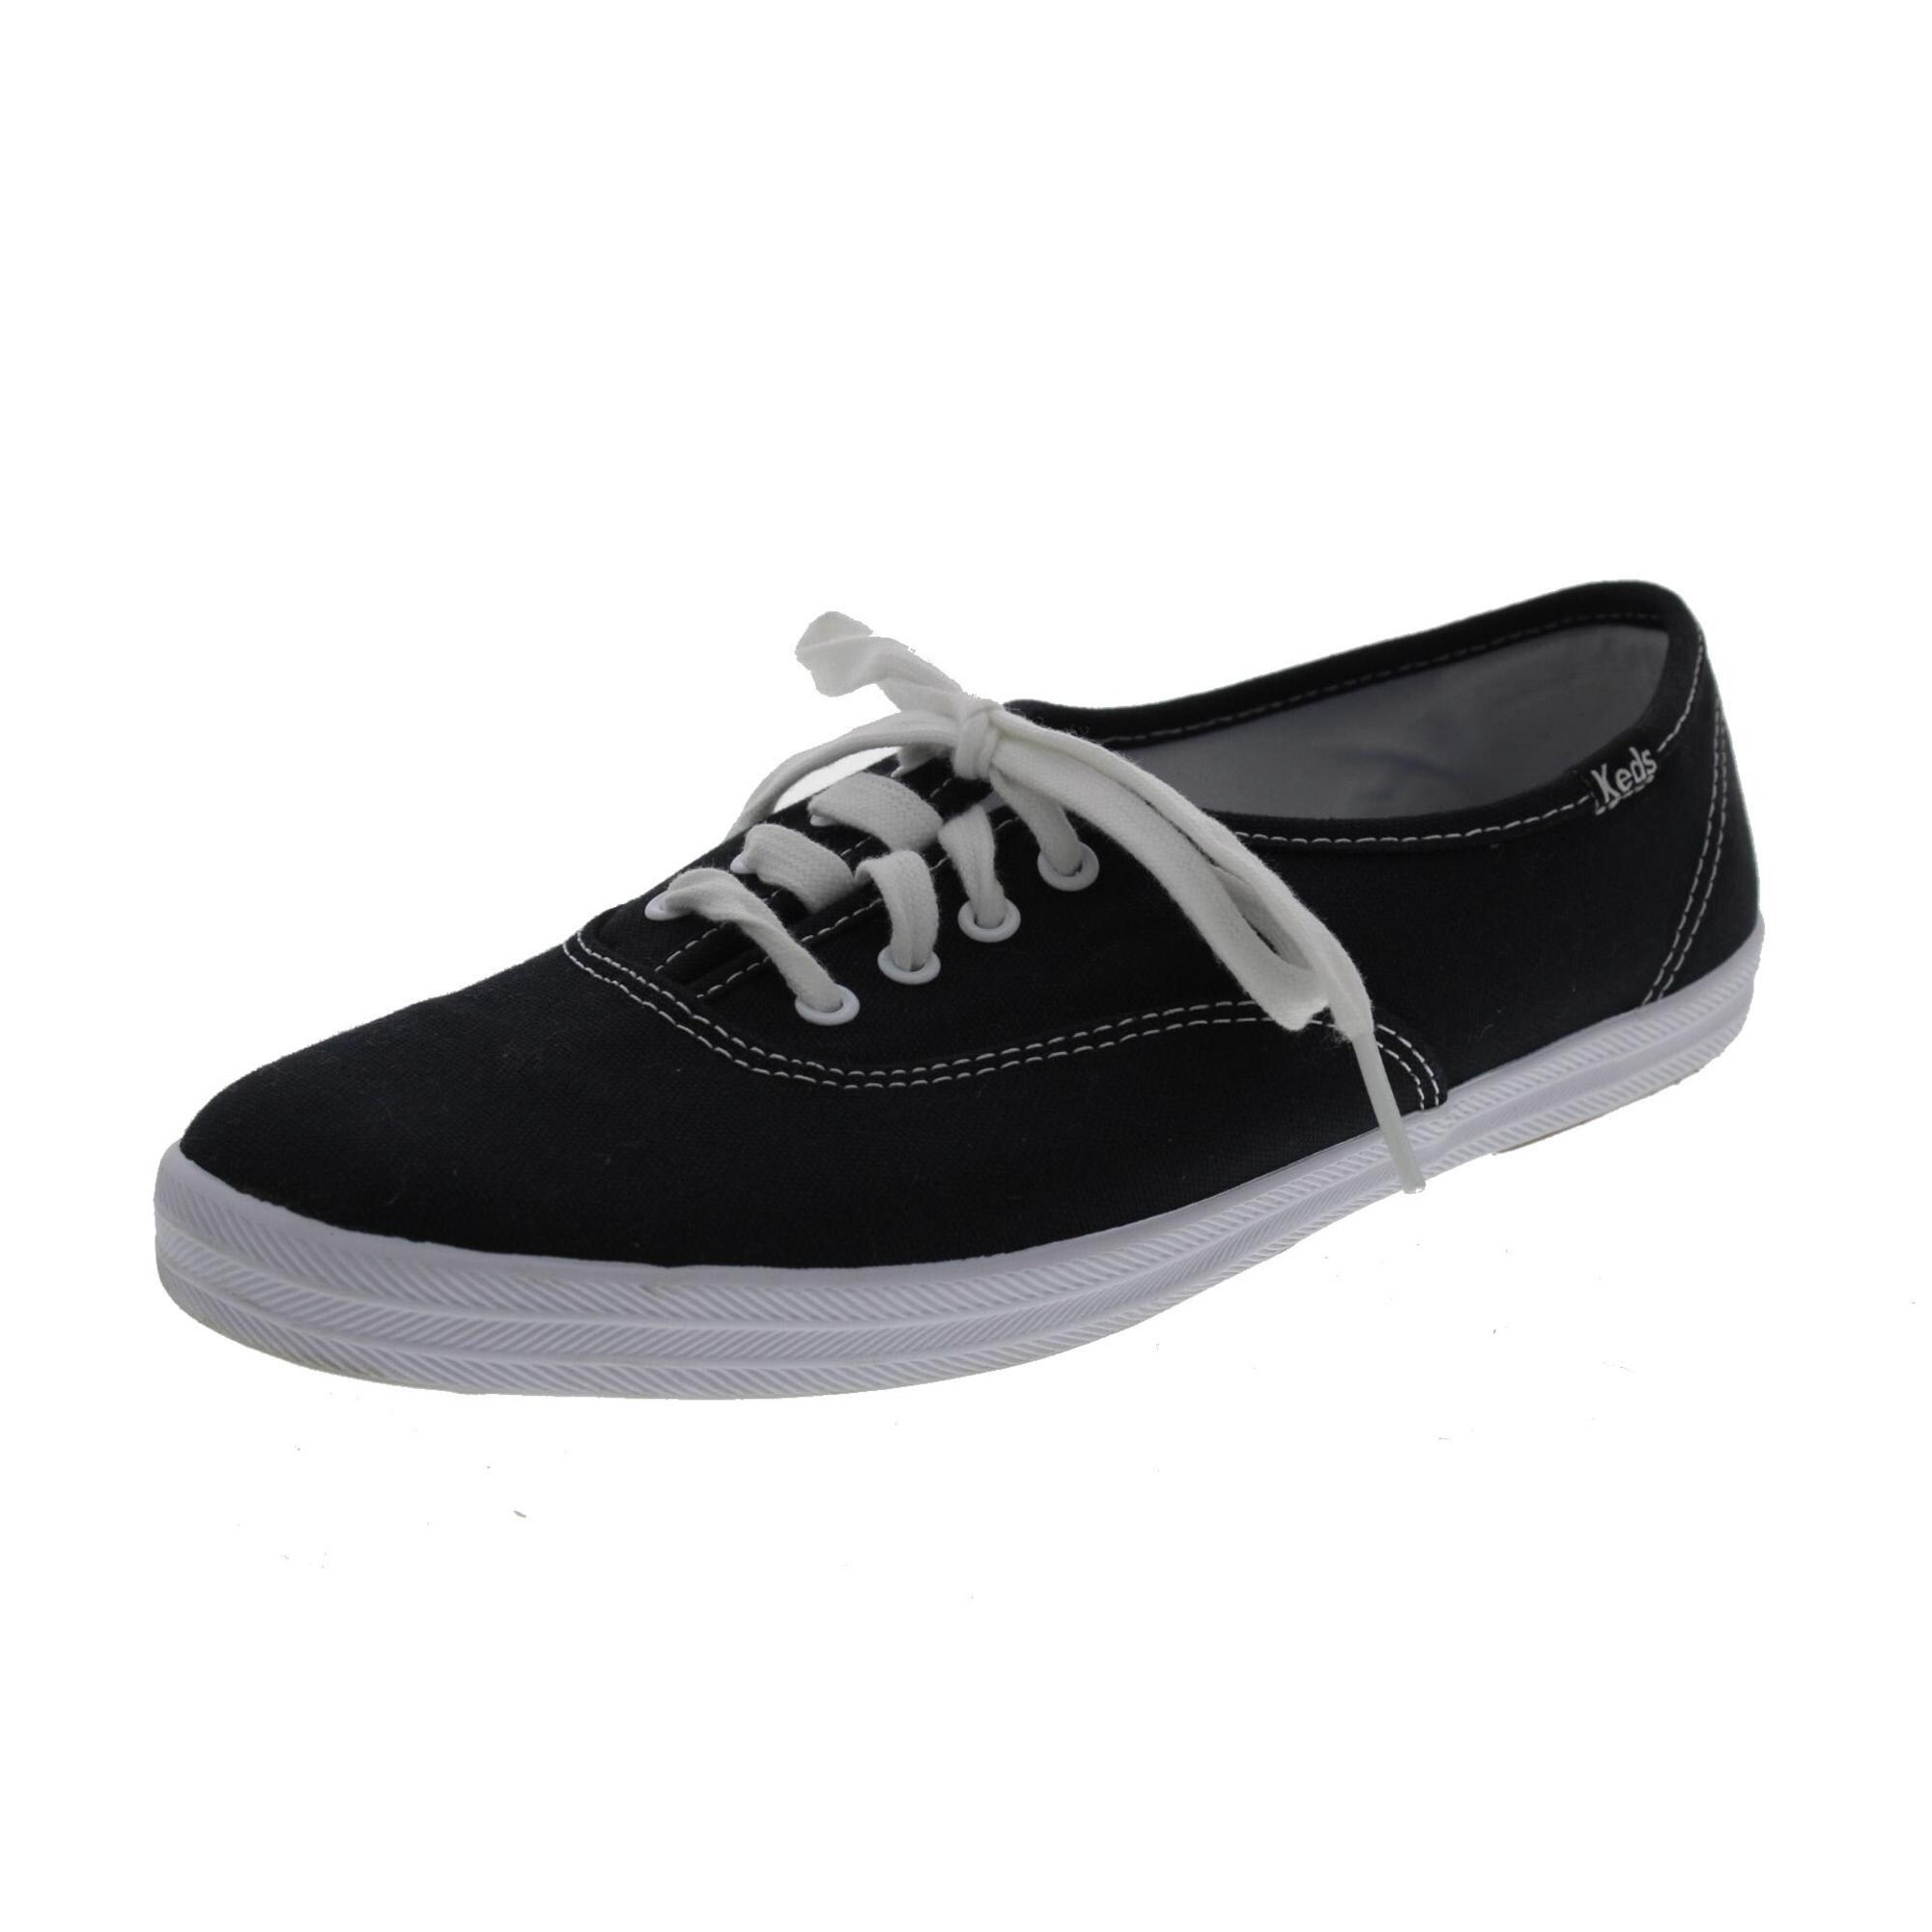 champion black casual shoes